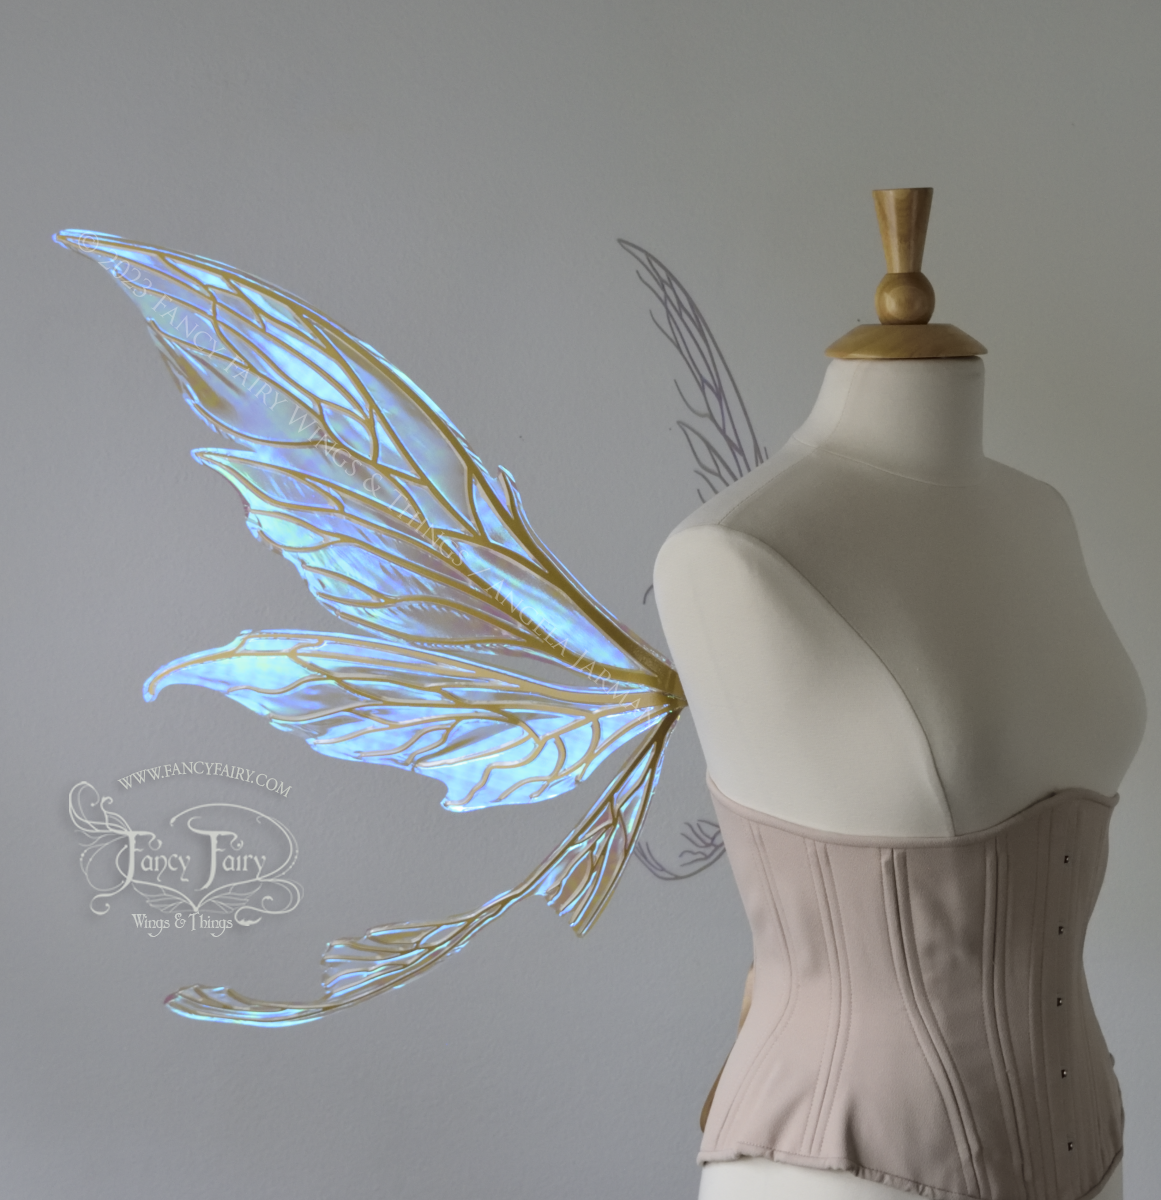 Right side view of a dress form wearing an underbust corset & large blue iridescent fairy wings with gold veins. Upper panels are elongated with pointed tips, curved ‘tail’ 